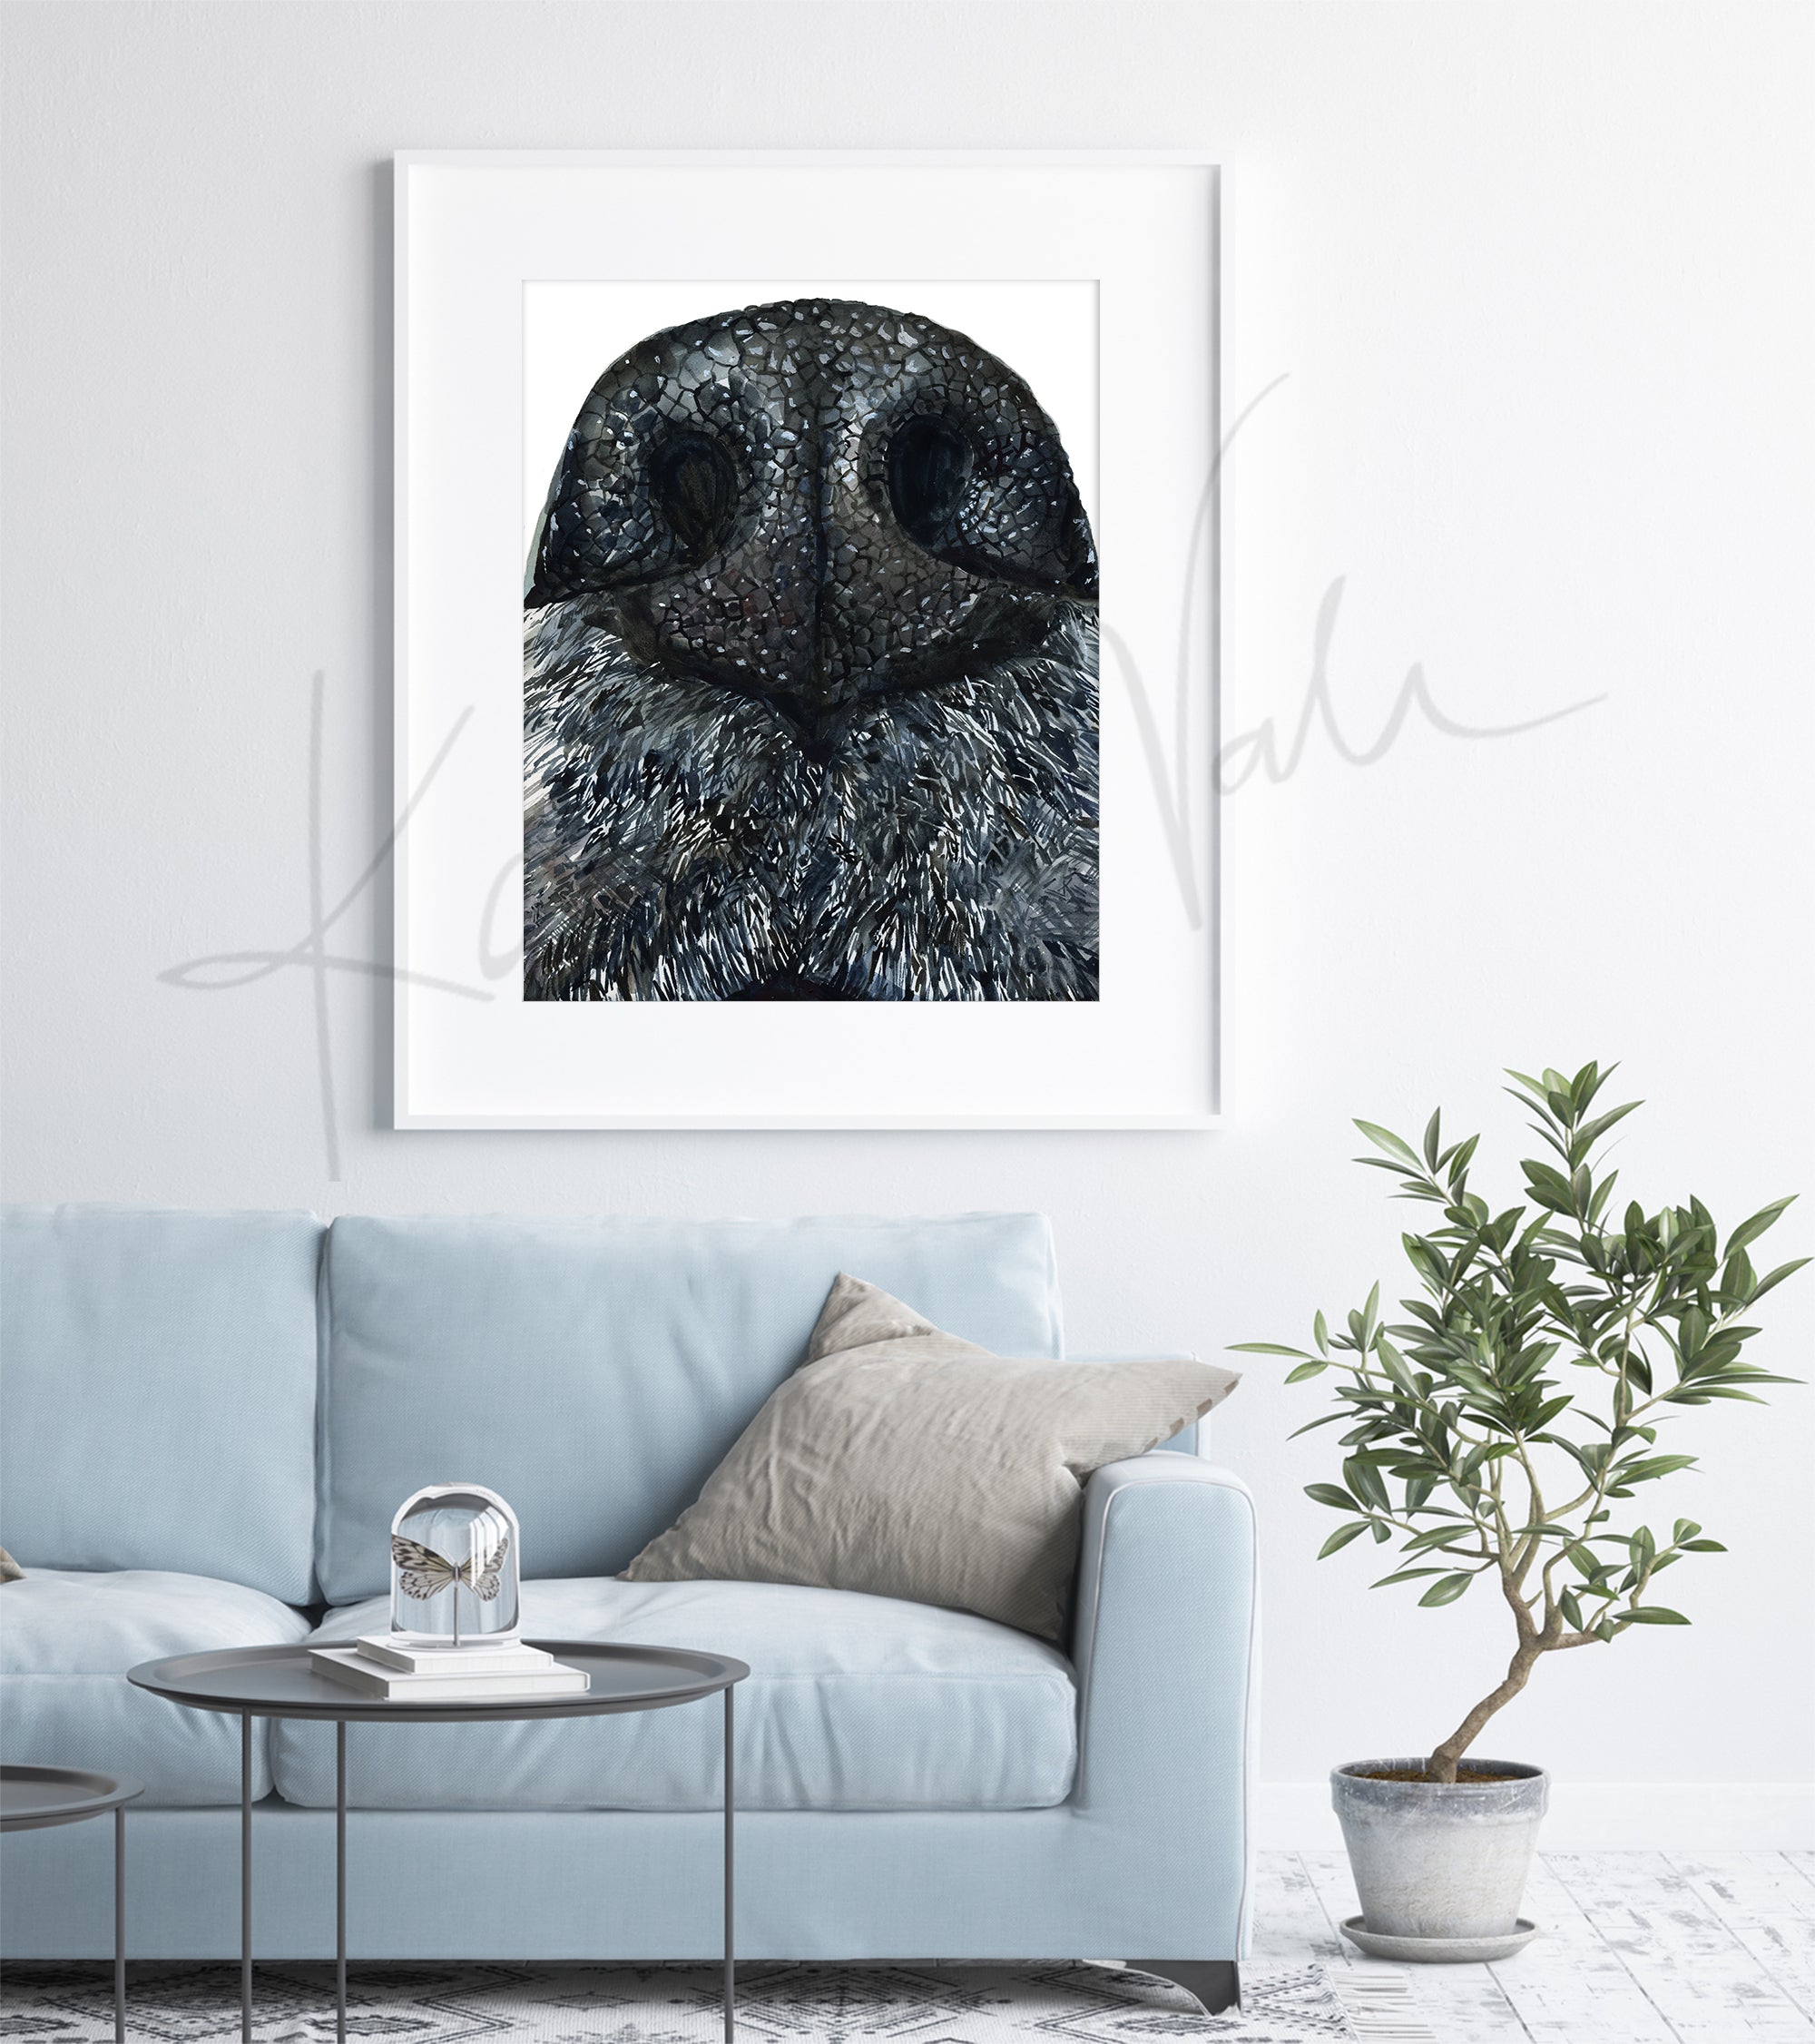 Framed watercolor painting of a zoomed in perspective of a dog’s nose.  The painting is hanging over a blue couch.